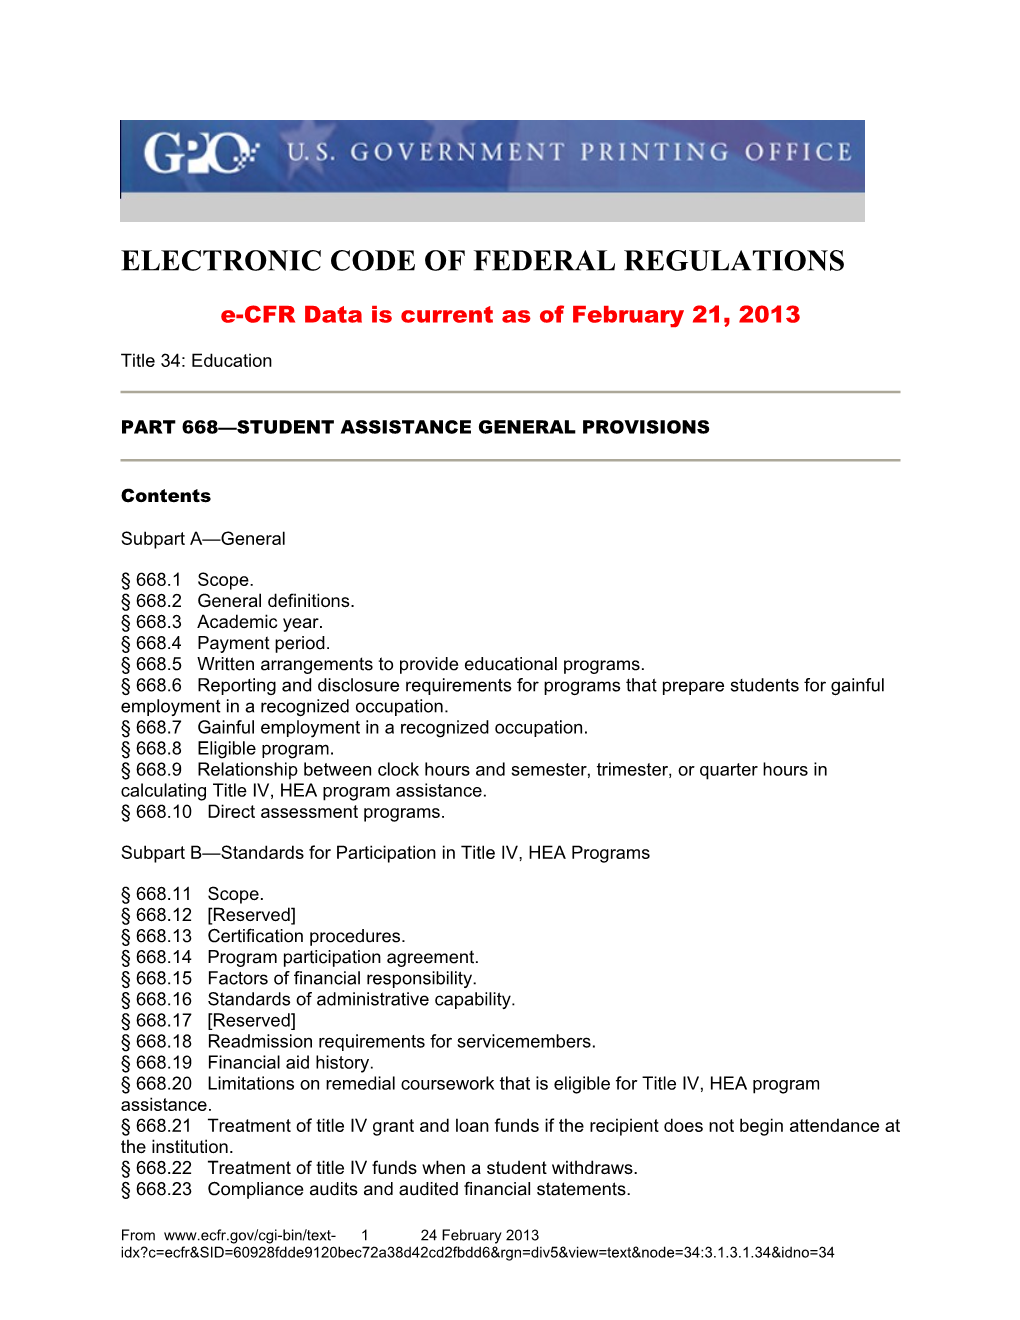 Electronic Code of Federal Regulations